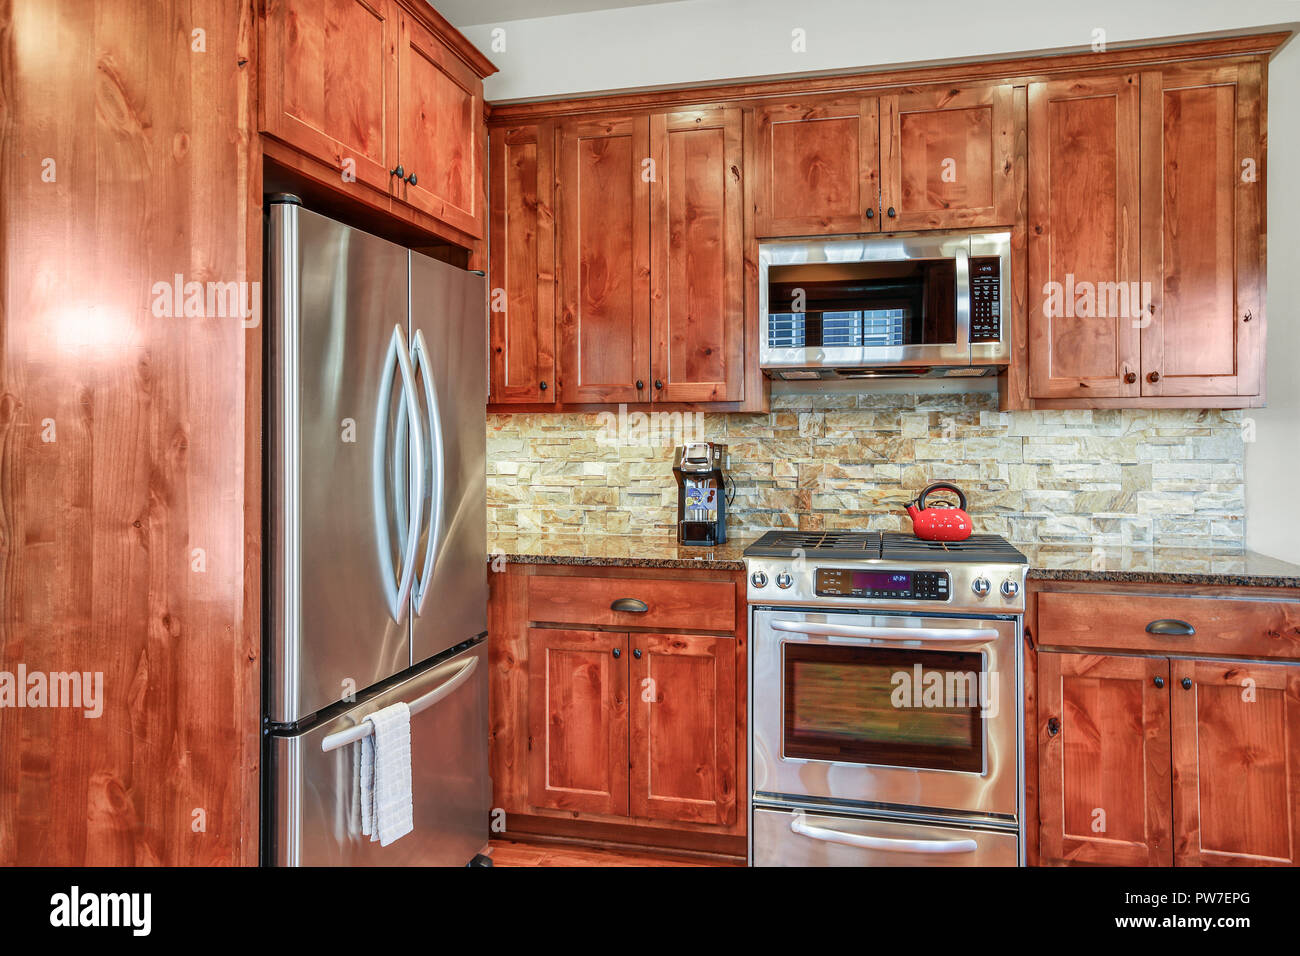 Wooden kitchen room with stone backsplash, granite countertops and stainless steel appliances. Northwest, USA Stock Photo